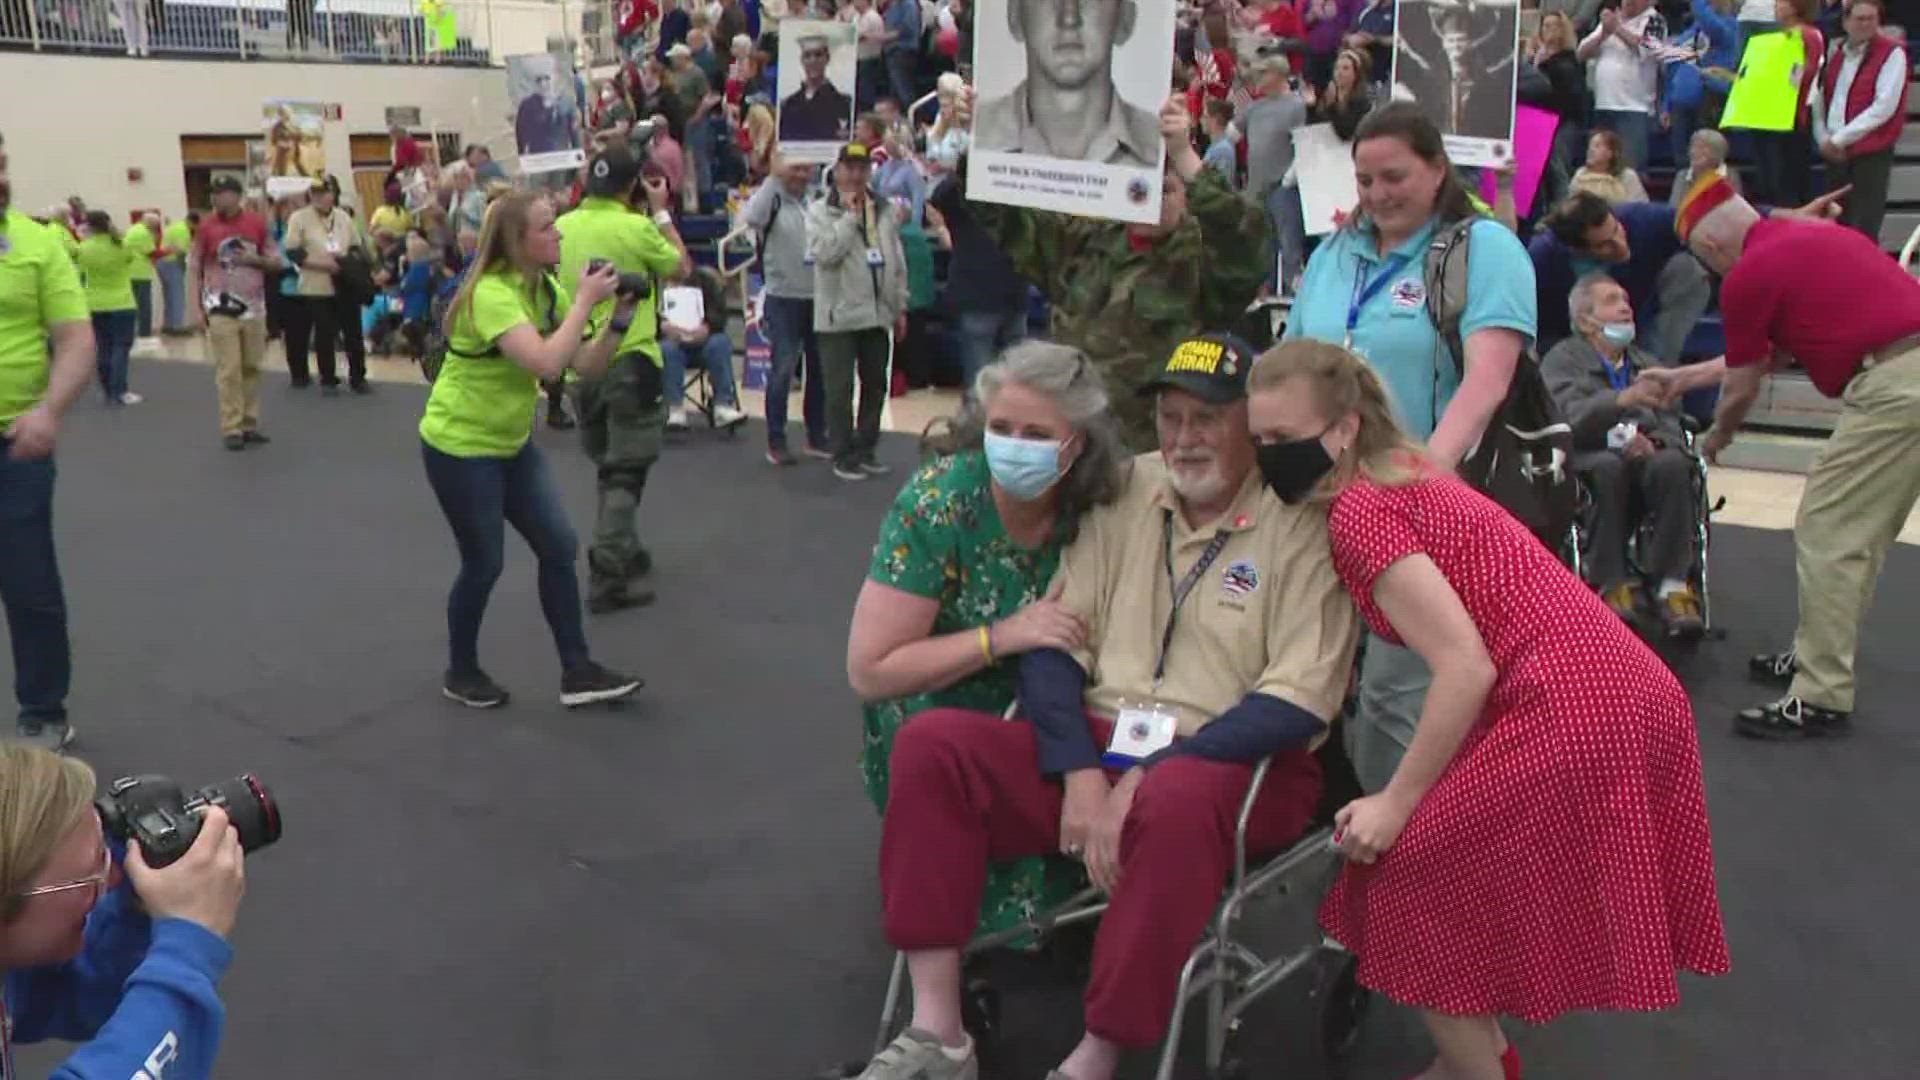 Eighty-six veterans returned to Indianapolis on Saturday after they participated in Indy Honor Flight's first trip to Washington D.C. since 2019.